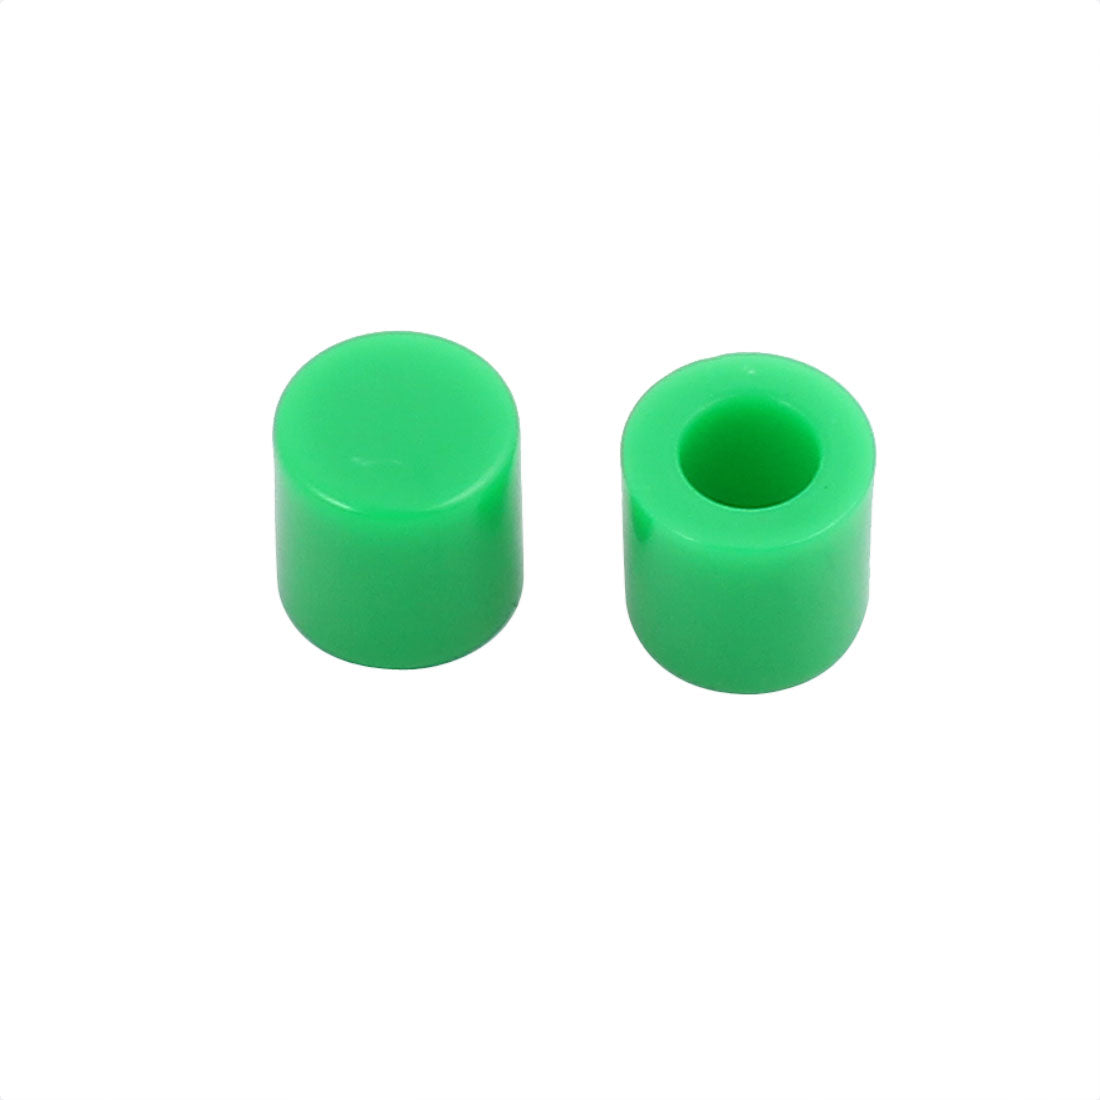 uxcell Uxcell 20Pcs Round Shaped Tactile Button Caps Covers Protector Green for 6x6mm Tact Switch